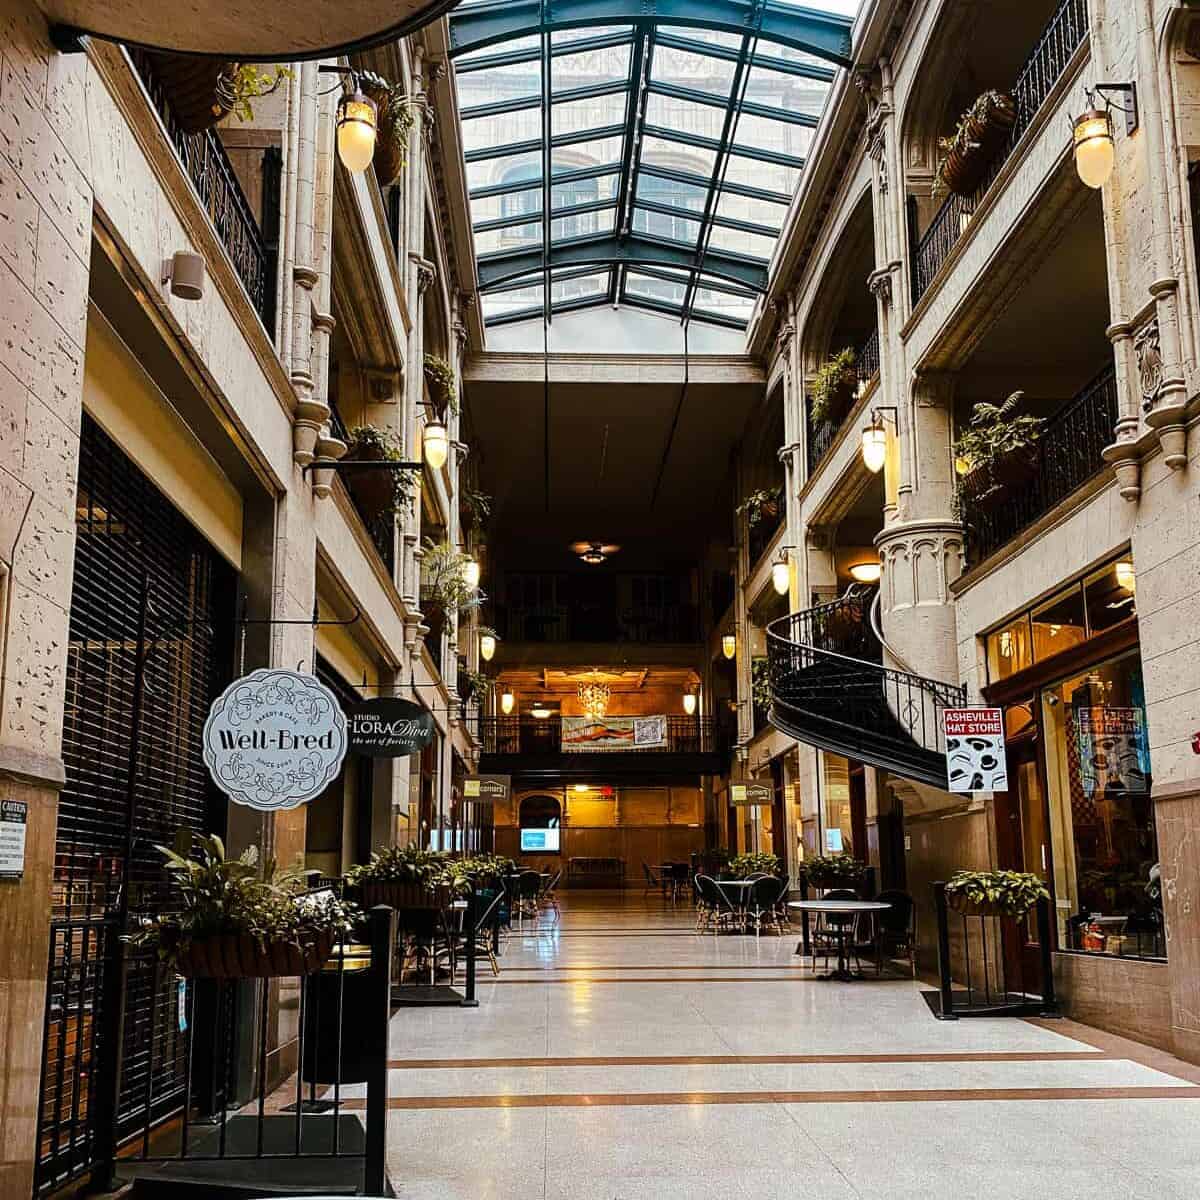 The Grove Arcade in Asheville NC, an indoor stone mall with shops